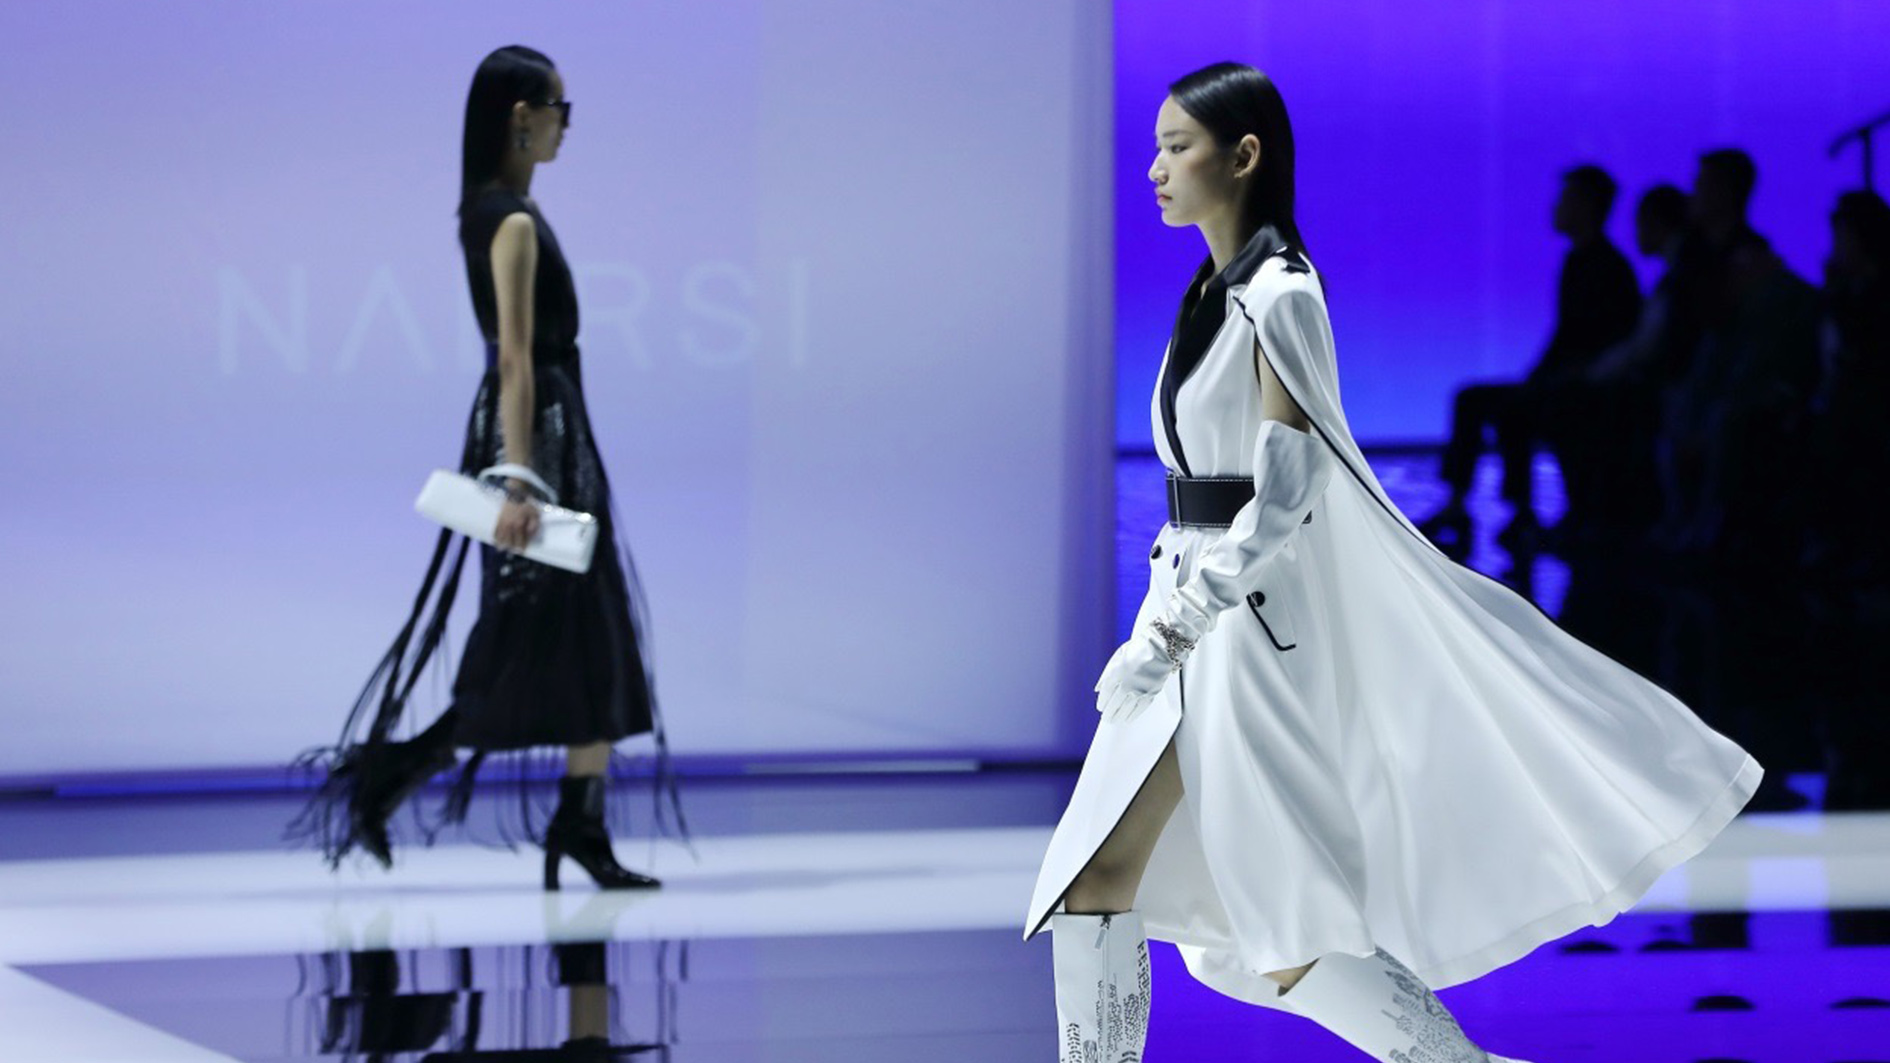 Big-scale fashion shows are back in China. How important are they